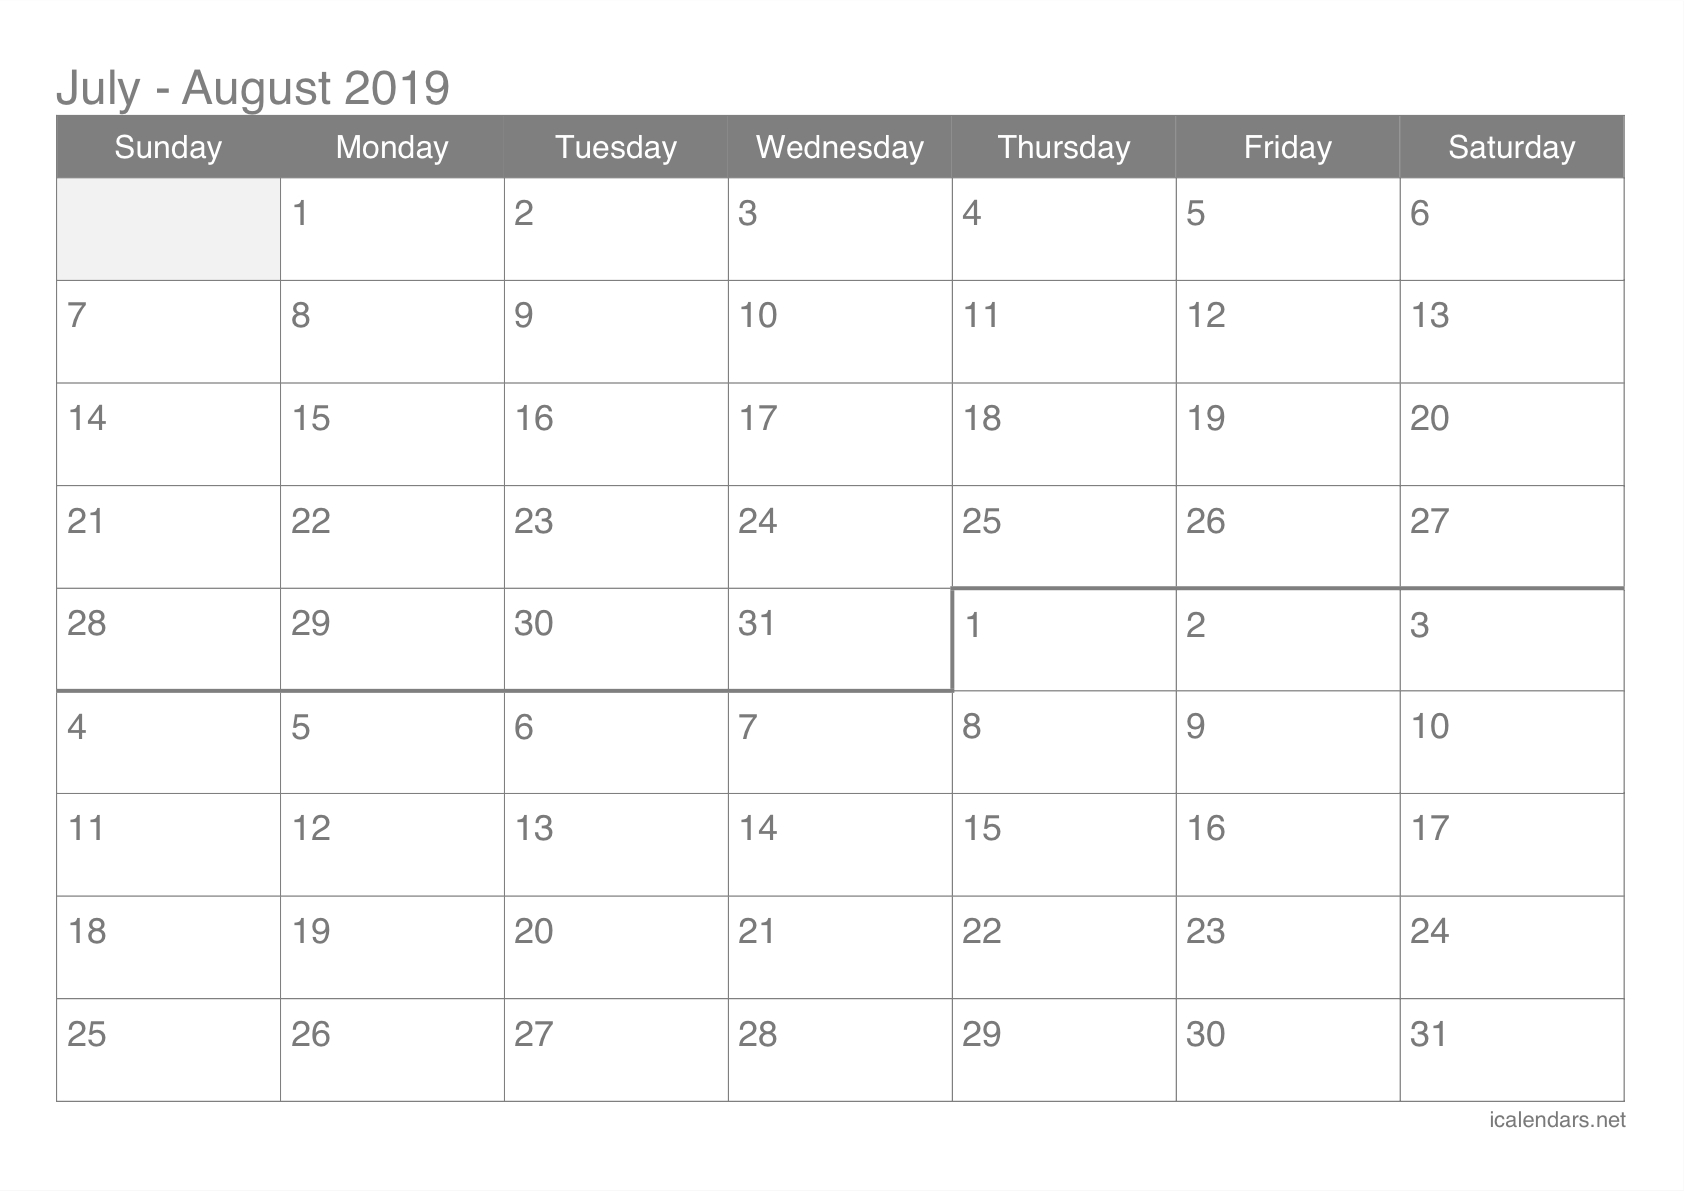 July And August 2019 Printable Calendar - Icalendars intended for Printable July Through August Calendars